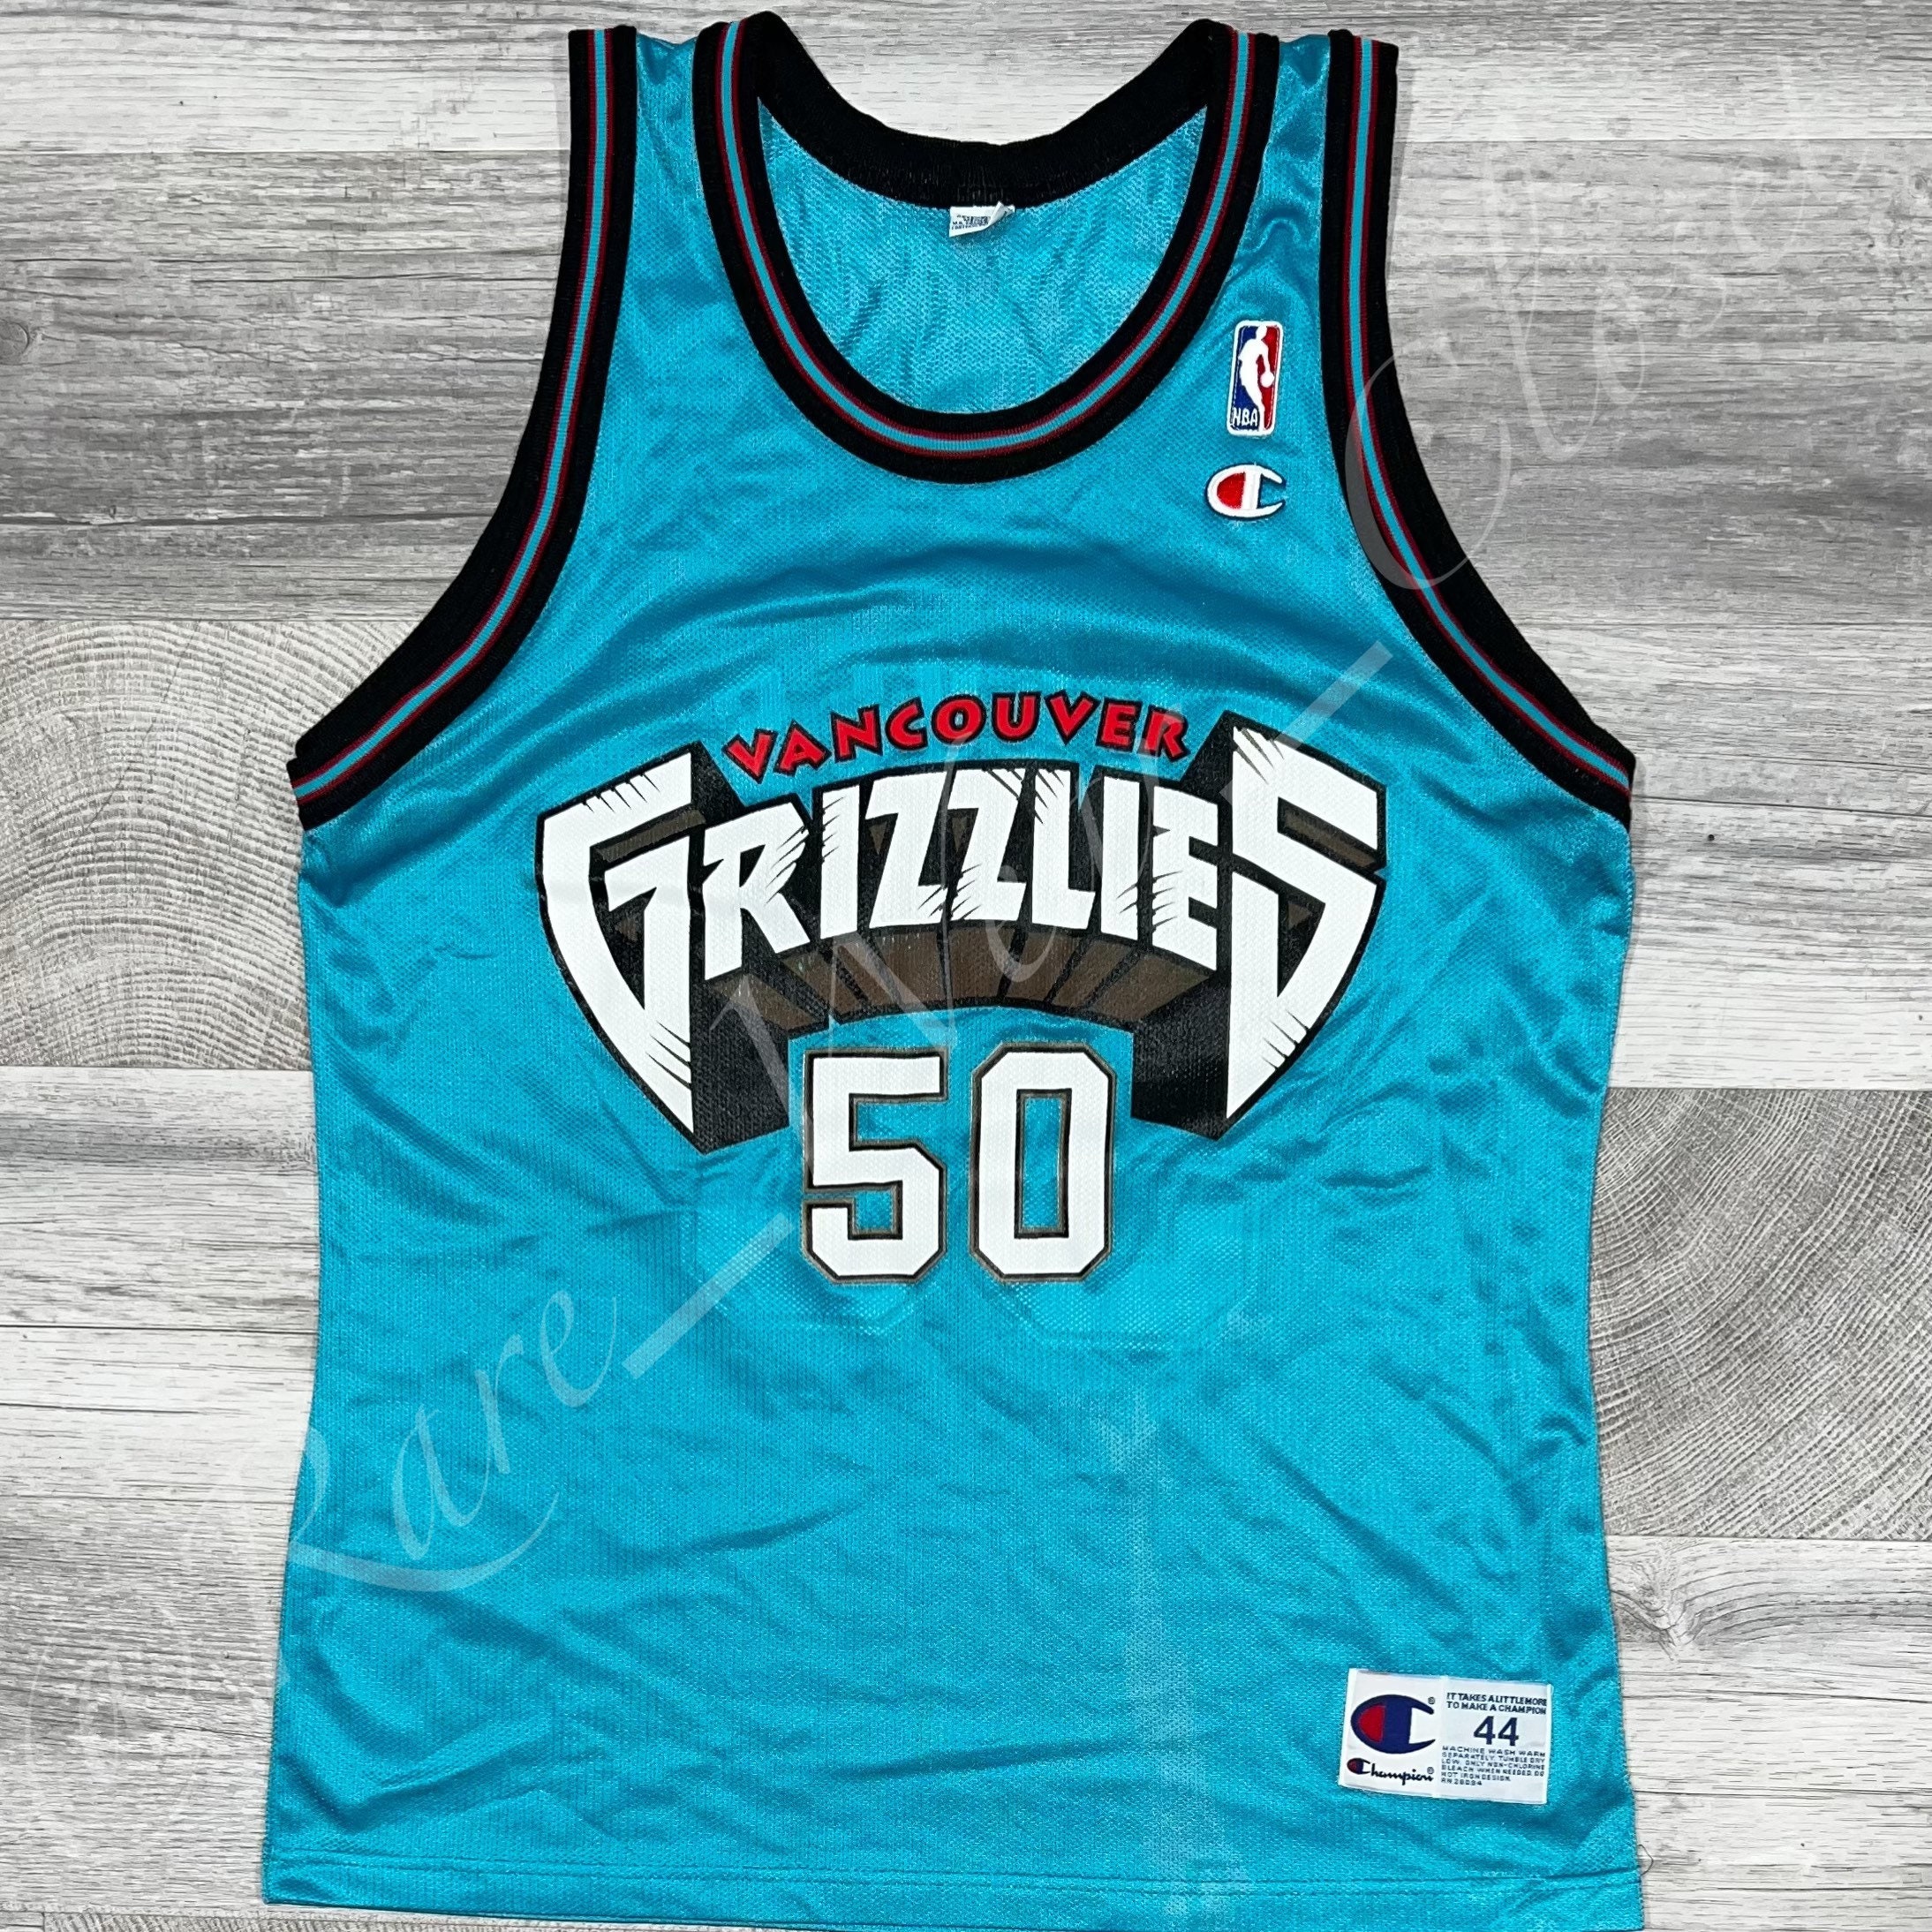 Vancouver Grizzlies Big Country Bryant Reeves Vintage Champion Basketball  Jersey